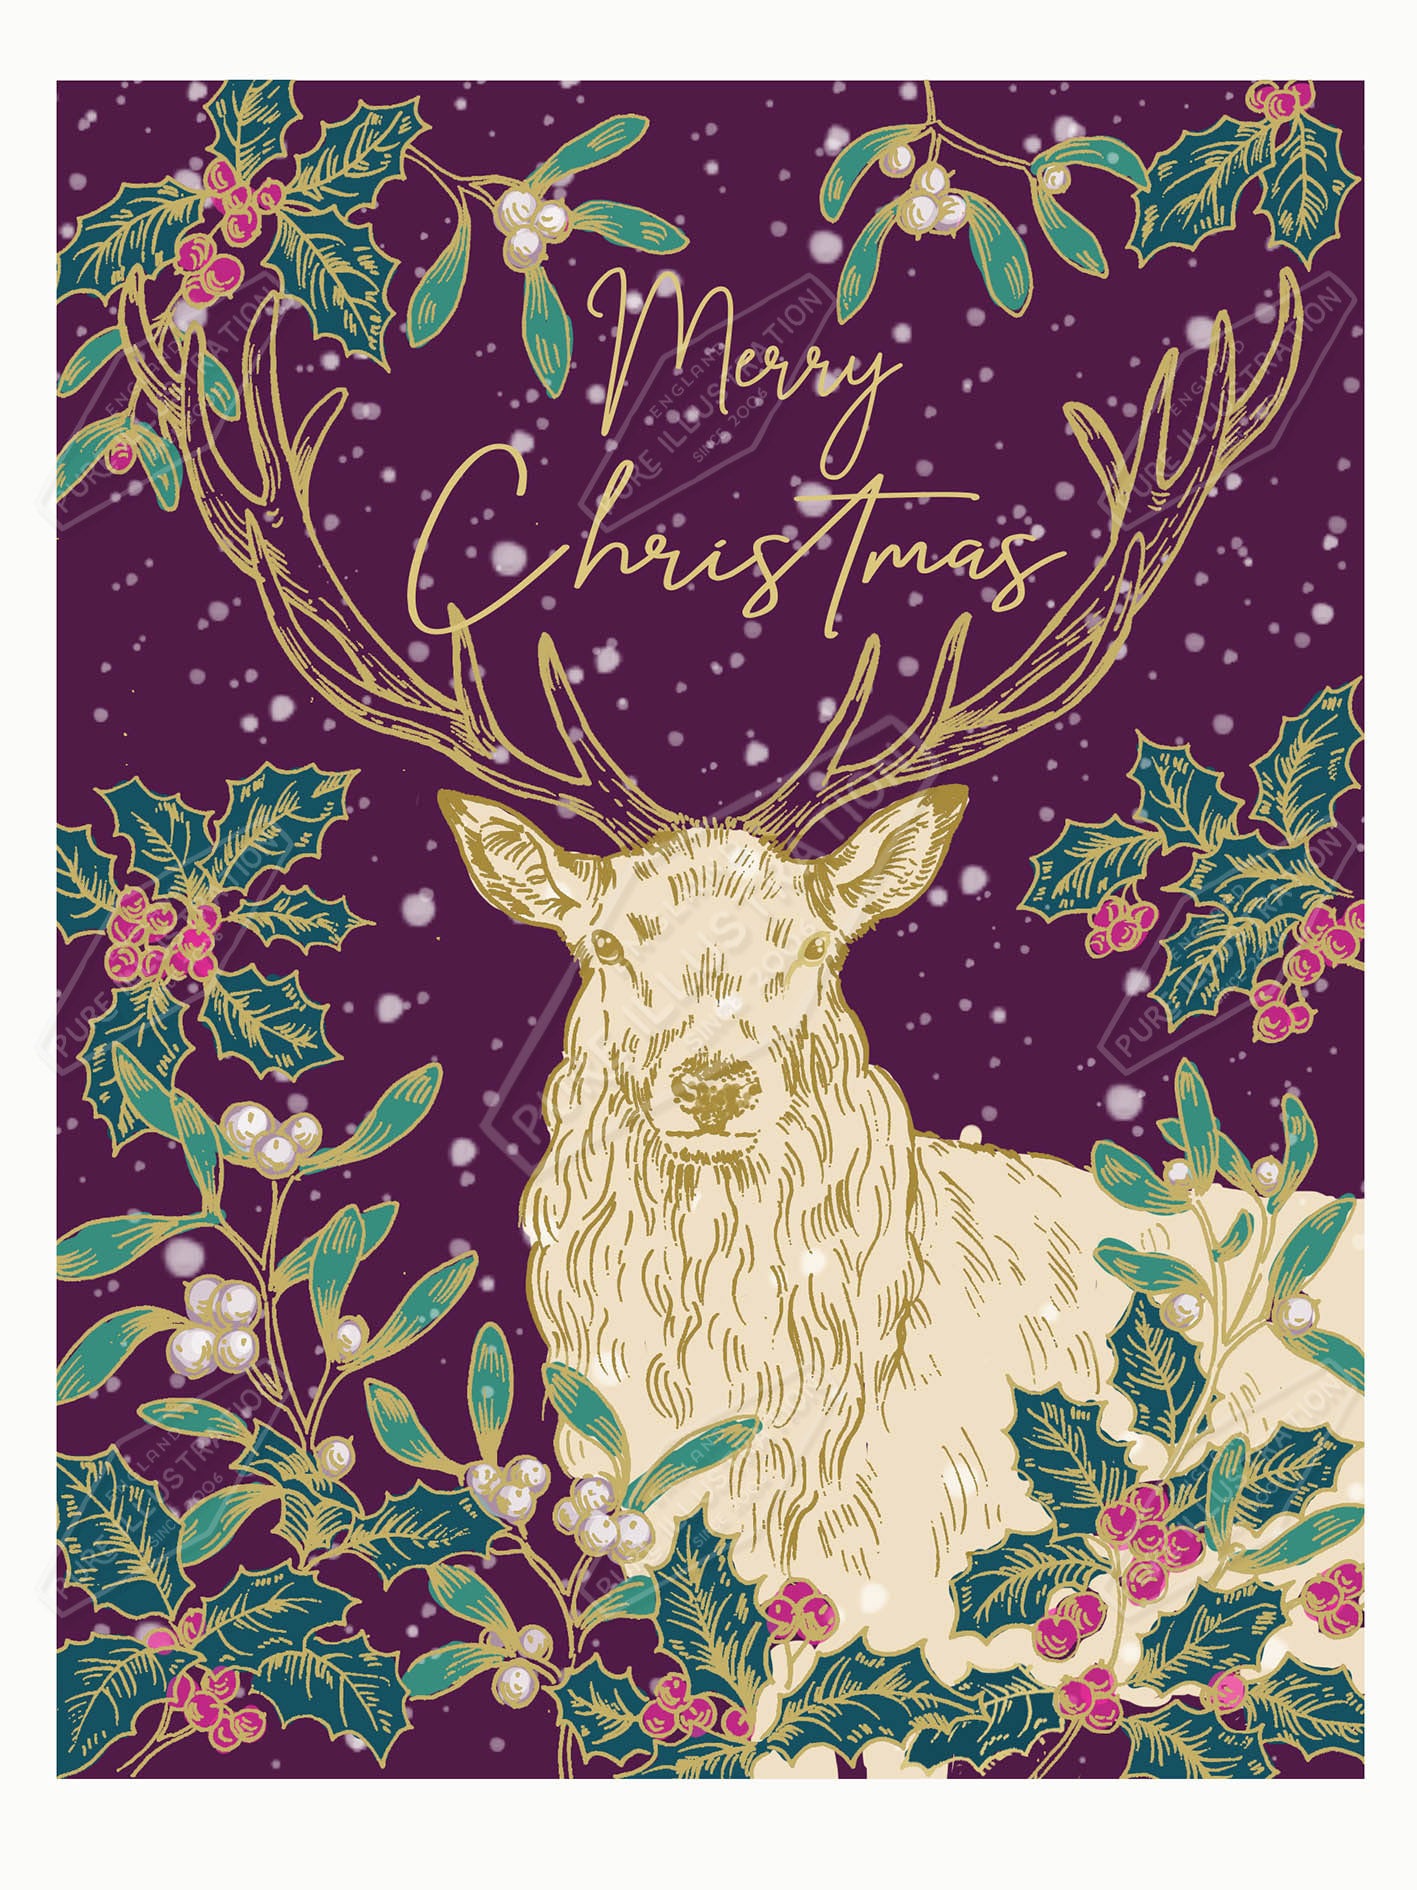 00035701AMA - Ally Marie is represented by Pure Art Licensing Agency - Christmas Greeting Card Design